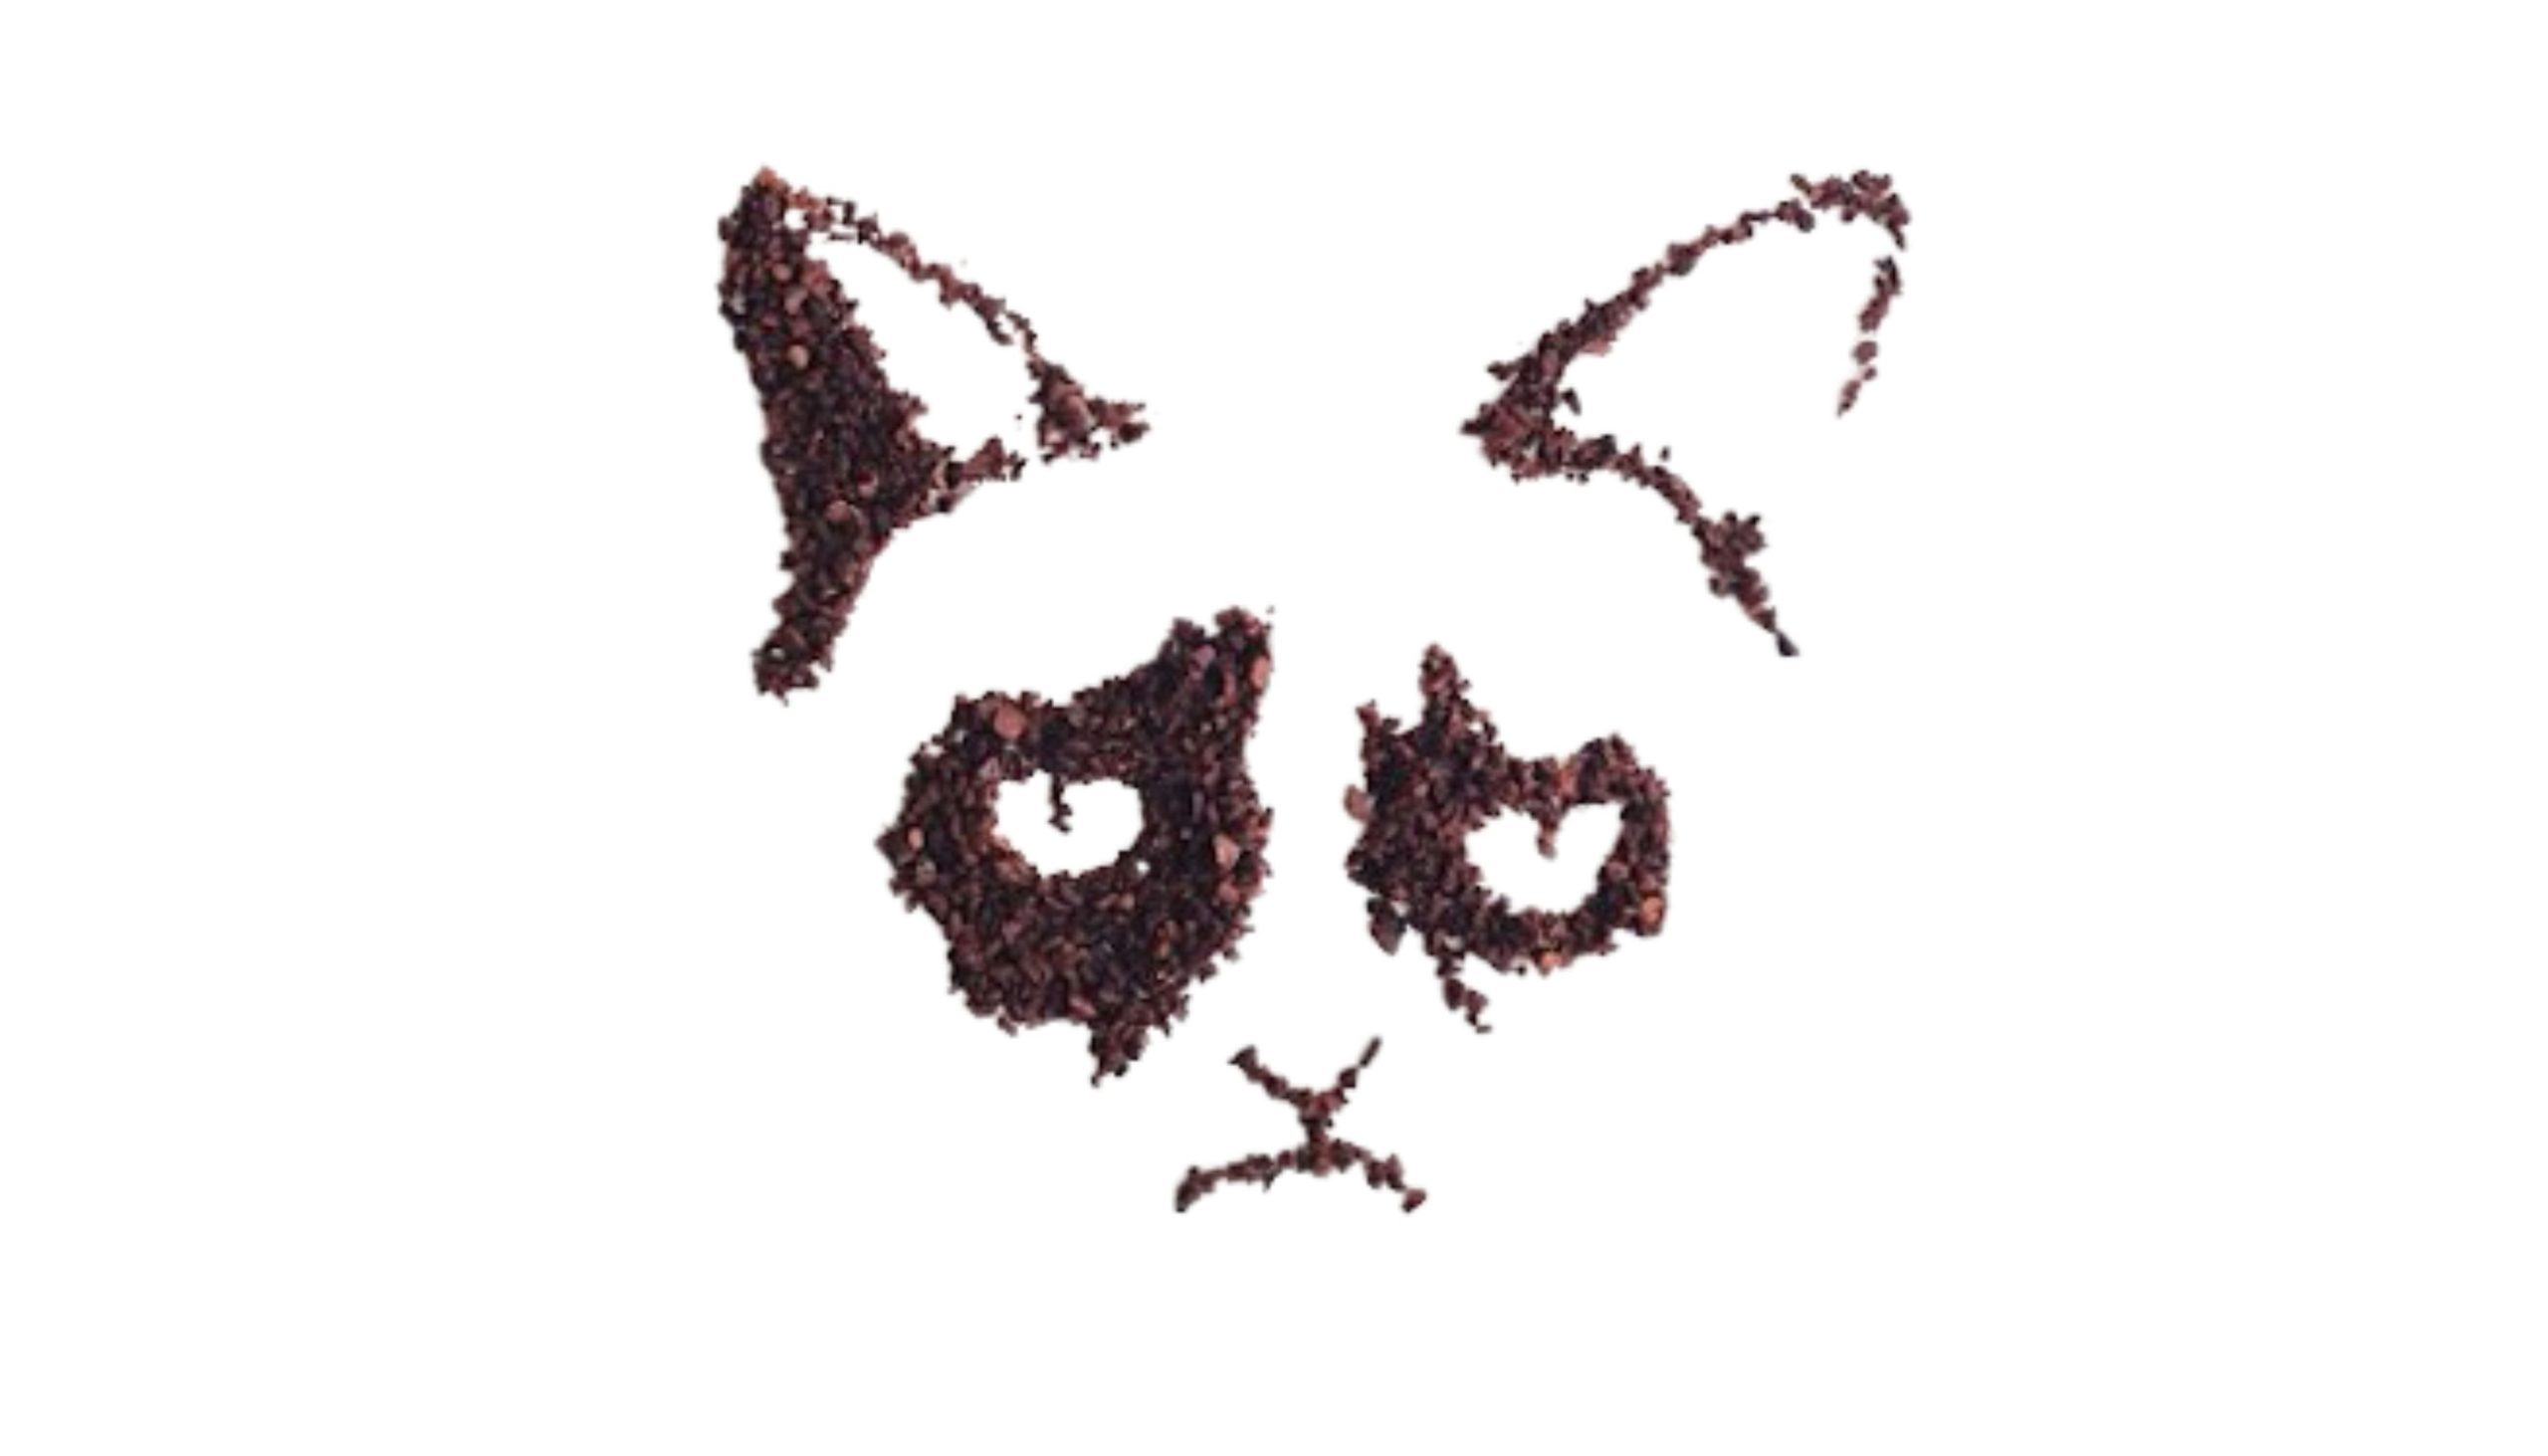 Coffee Grounds Art:  Who said coffee was just for drinking?